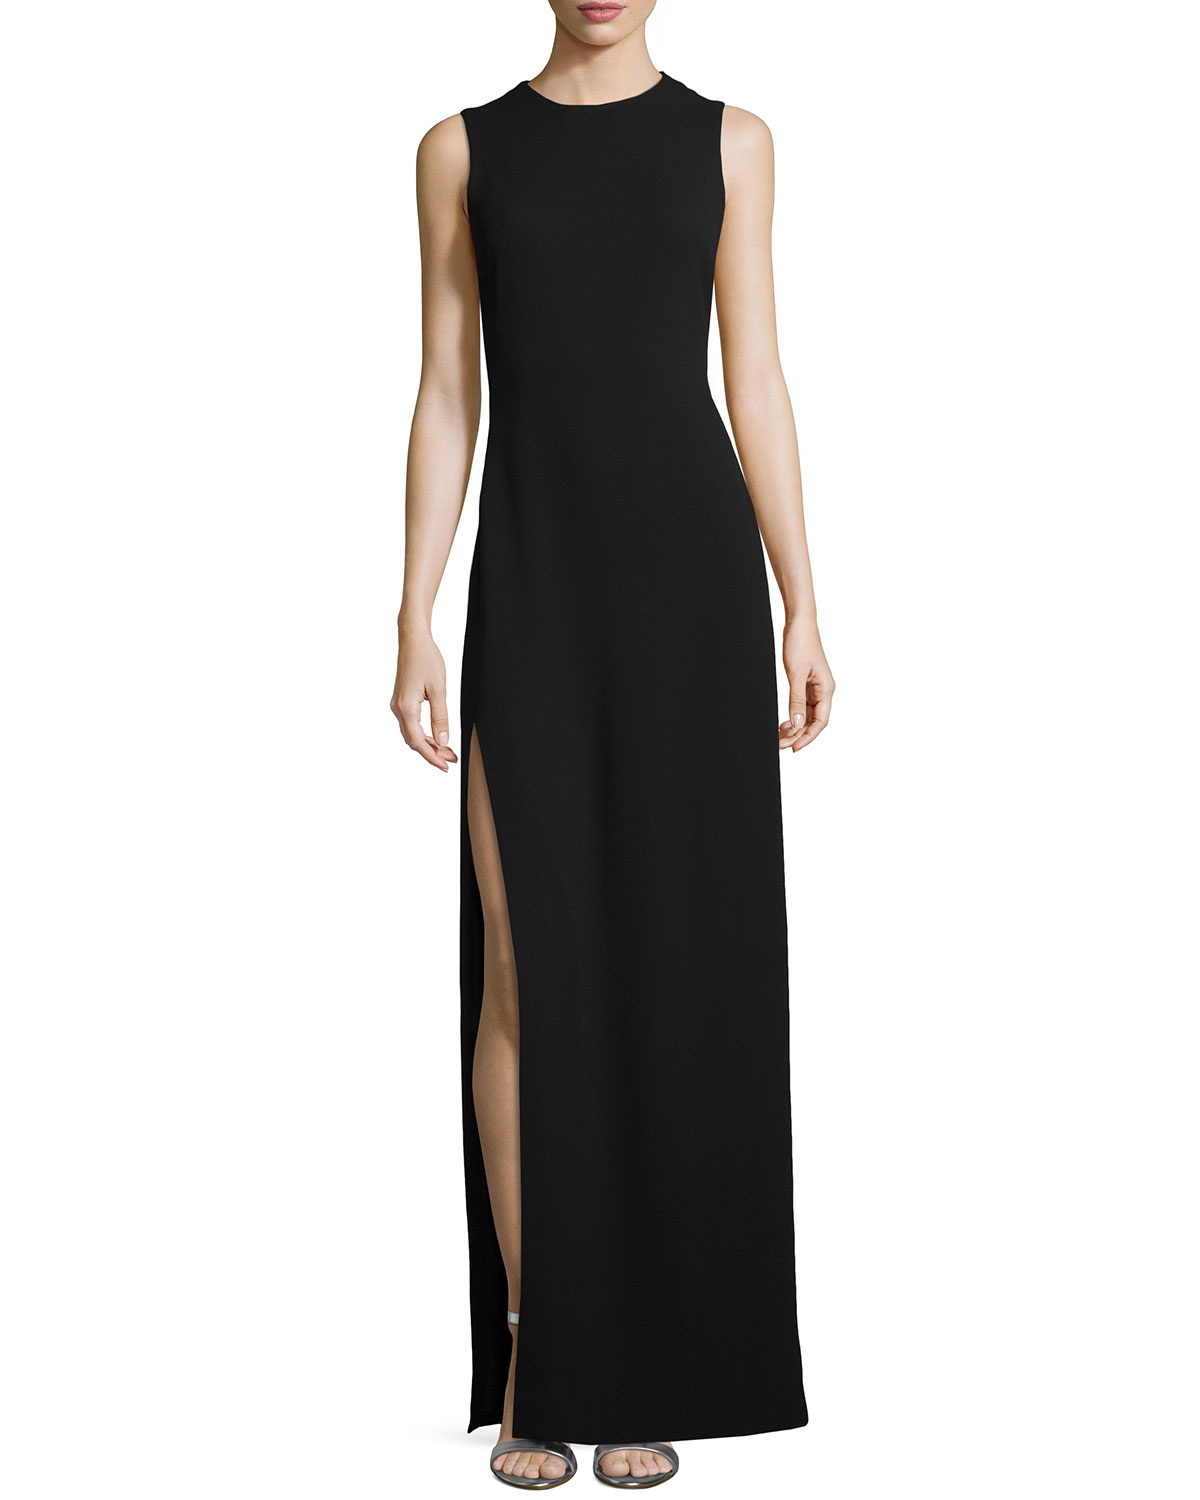 Lyst - Halston Column Gown With Back Cutout in Black